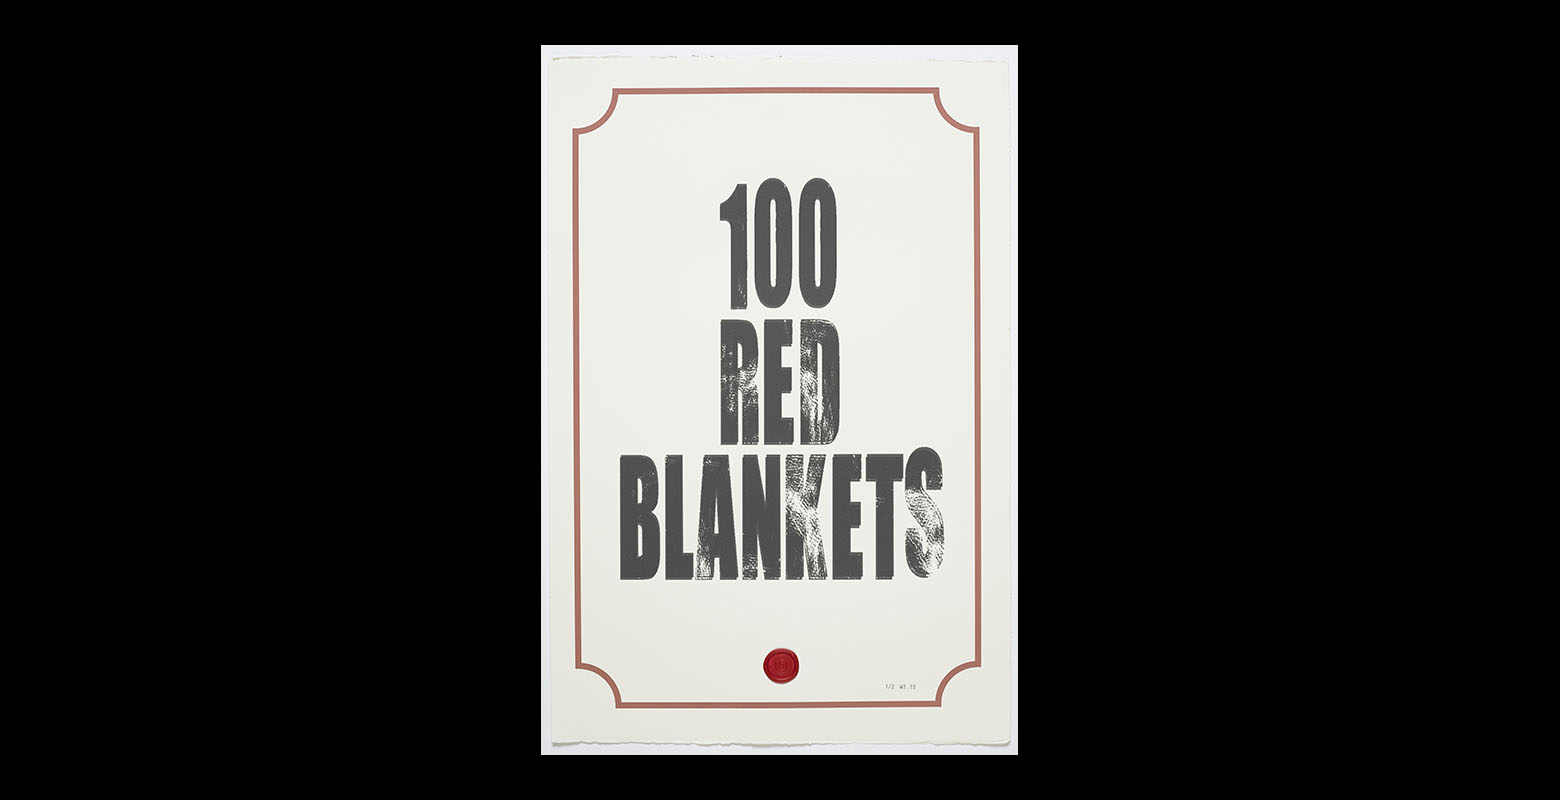 Poster, with the text “100 red blankets” printed in bold capital letters in the middle. The poster has a red frame in it and a red wax seal